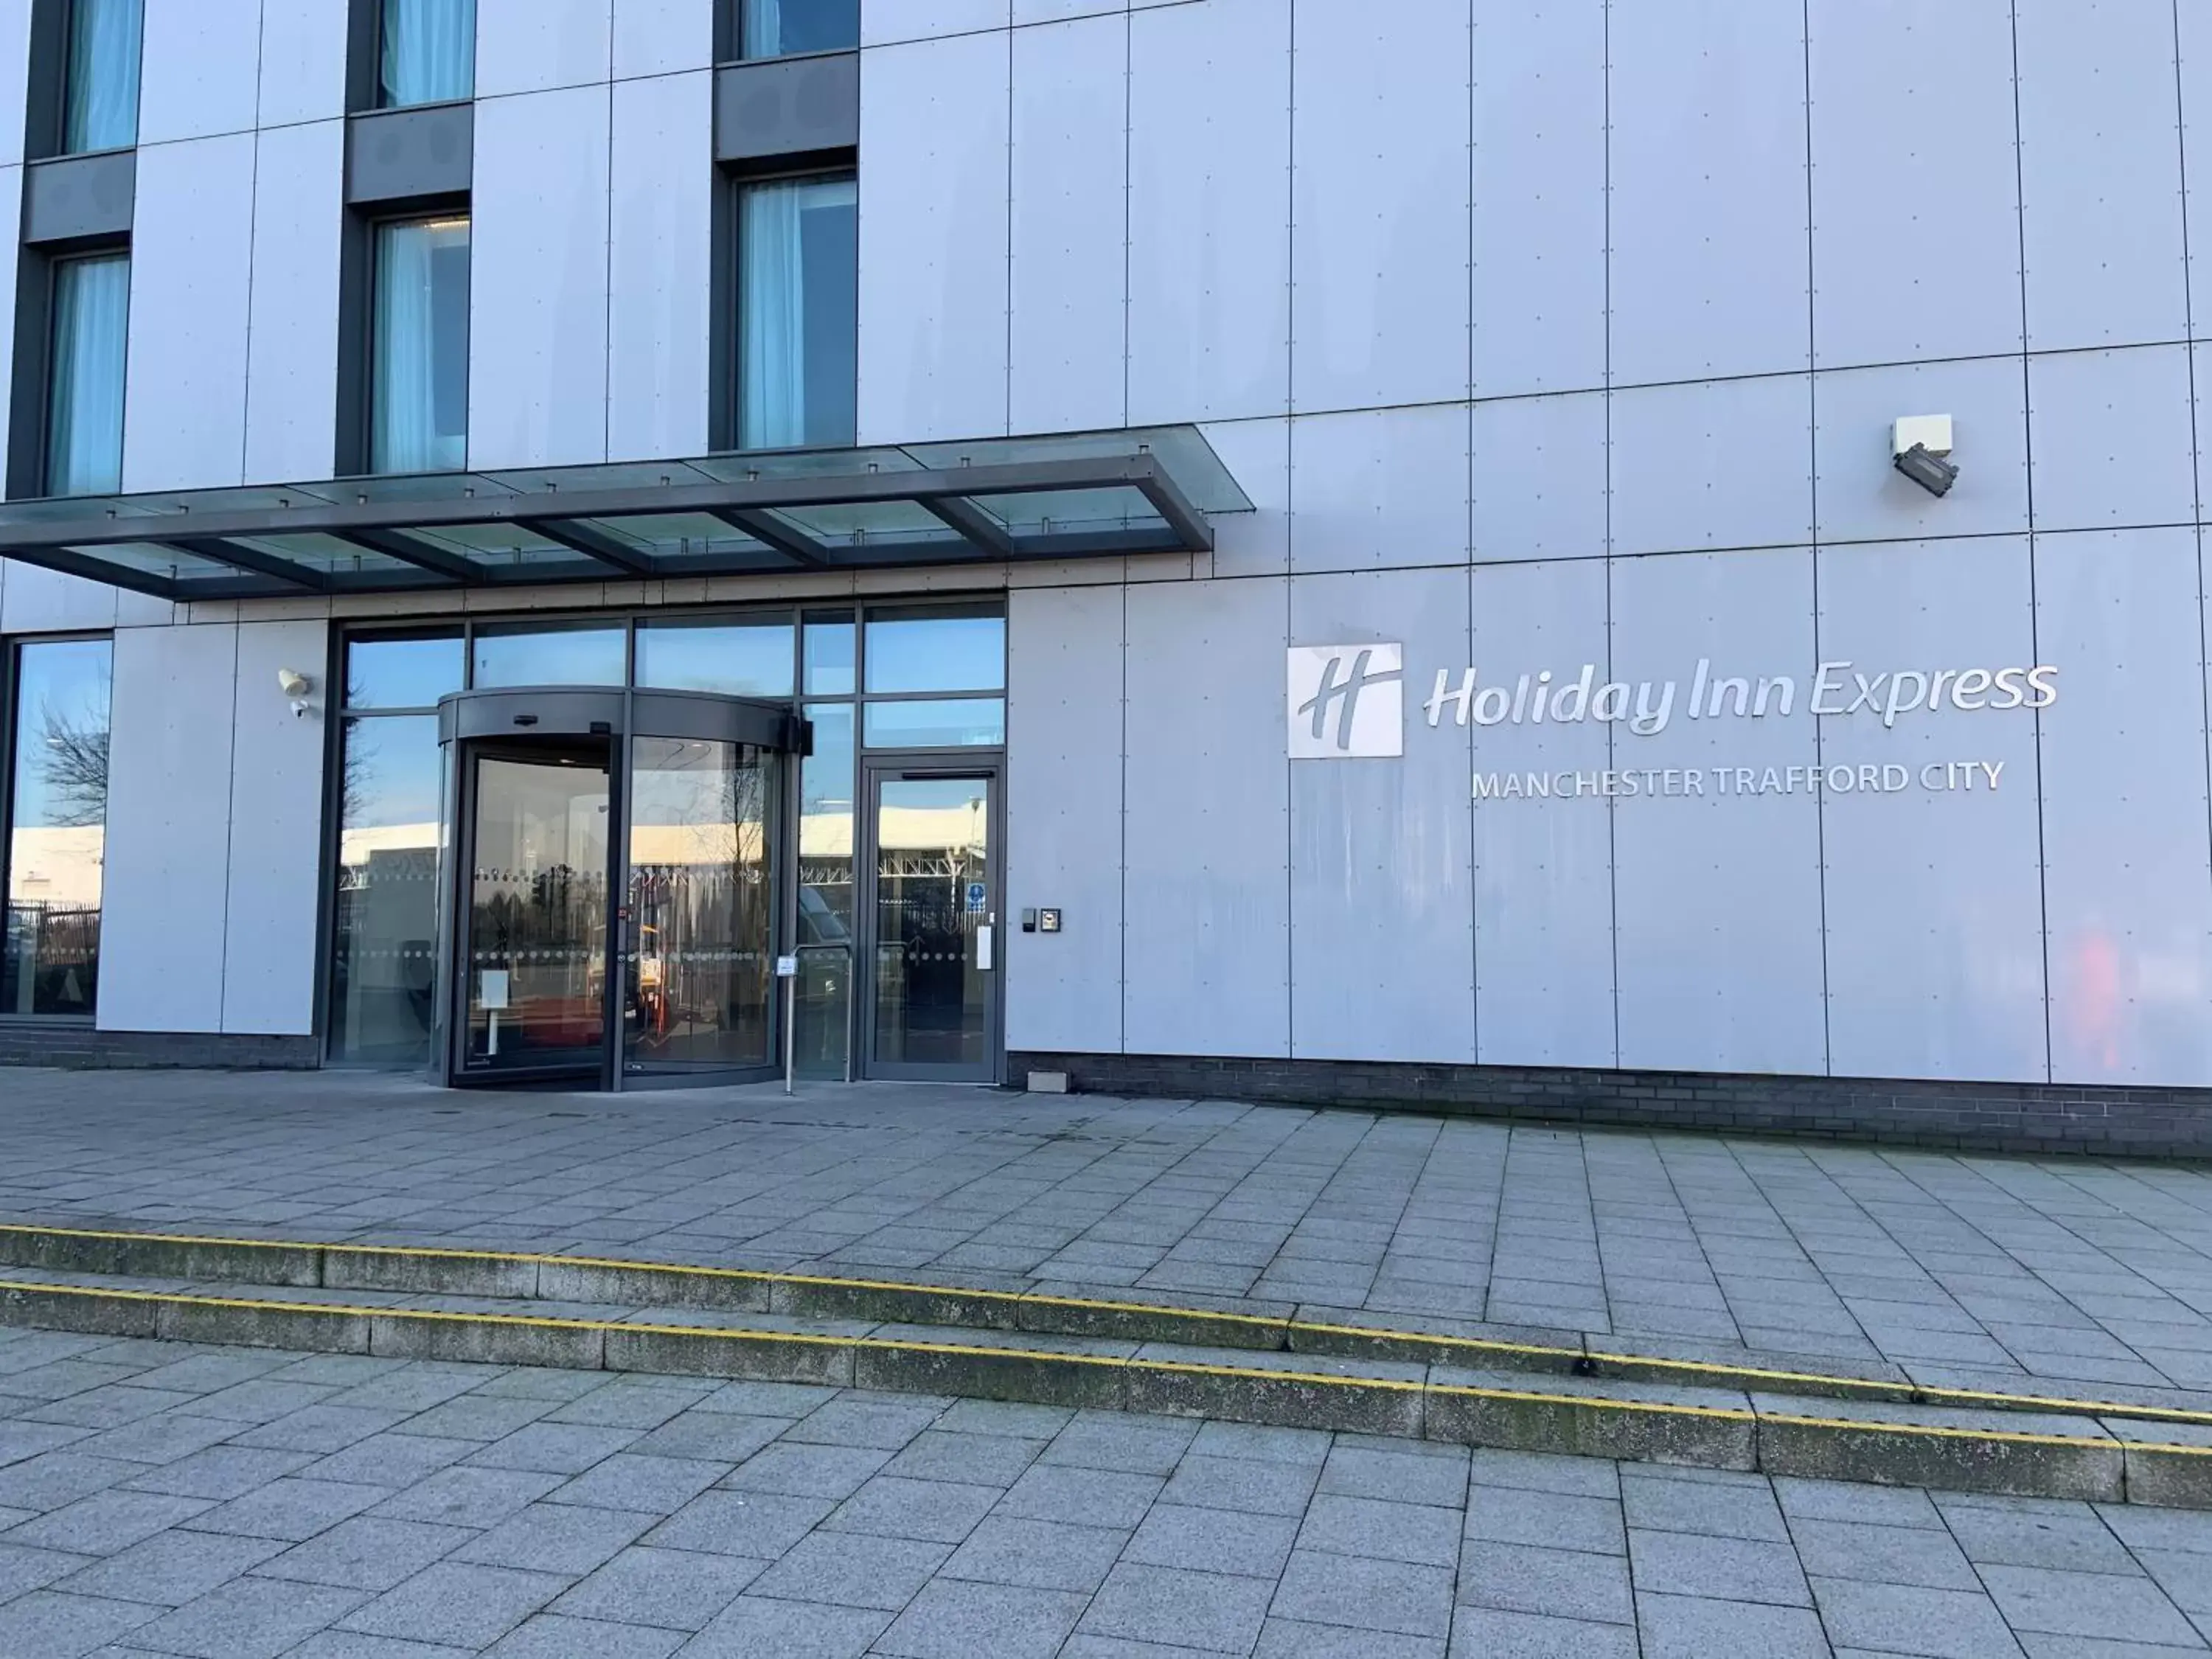 Property Building in Holiday Inn Express - Manchester - TRAFFORDCITY, an IHG Hotel